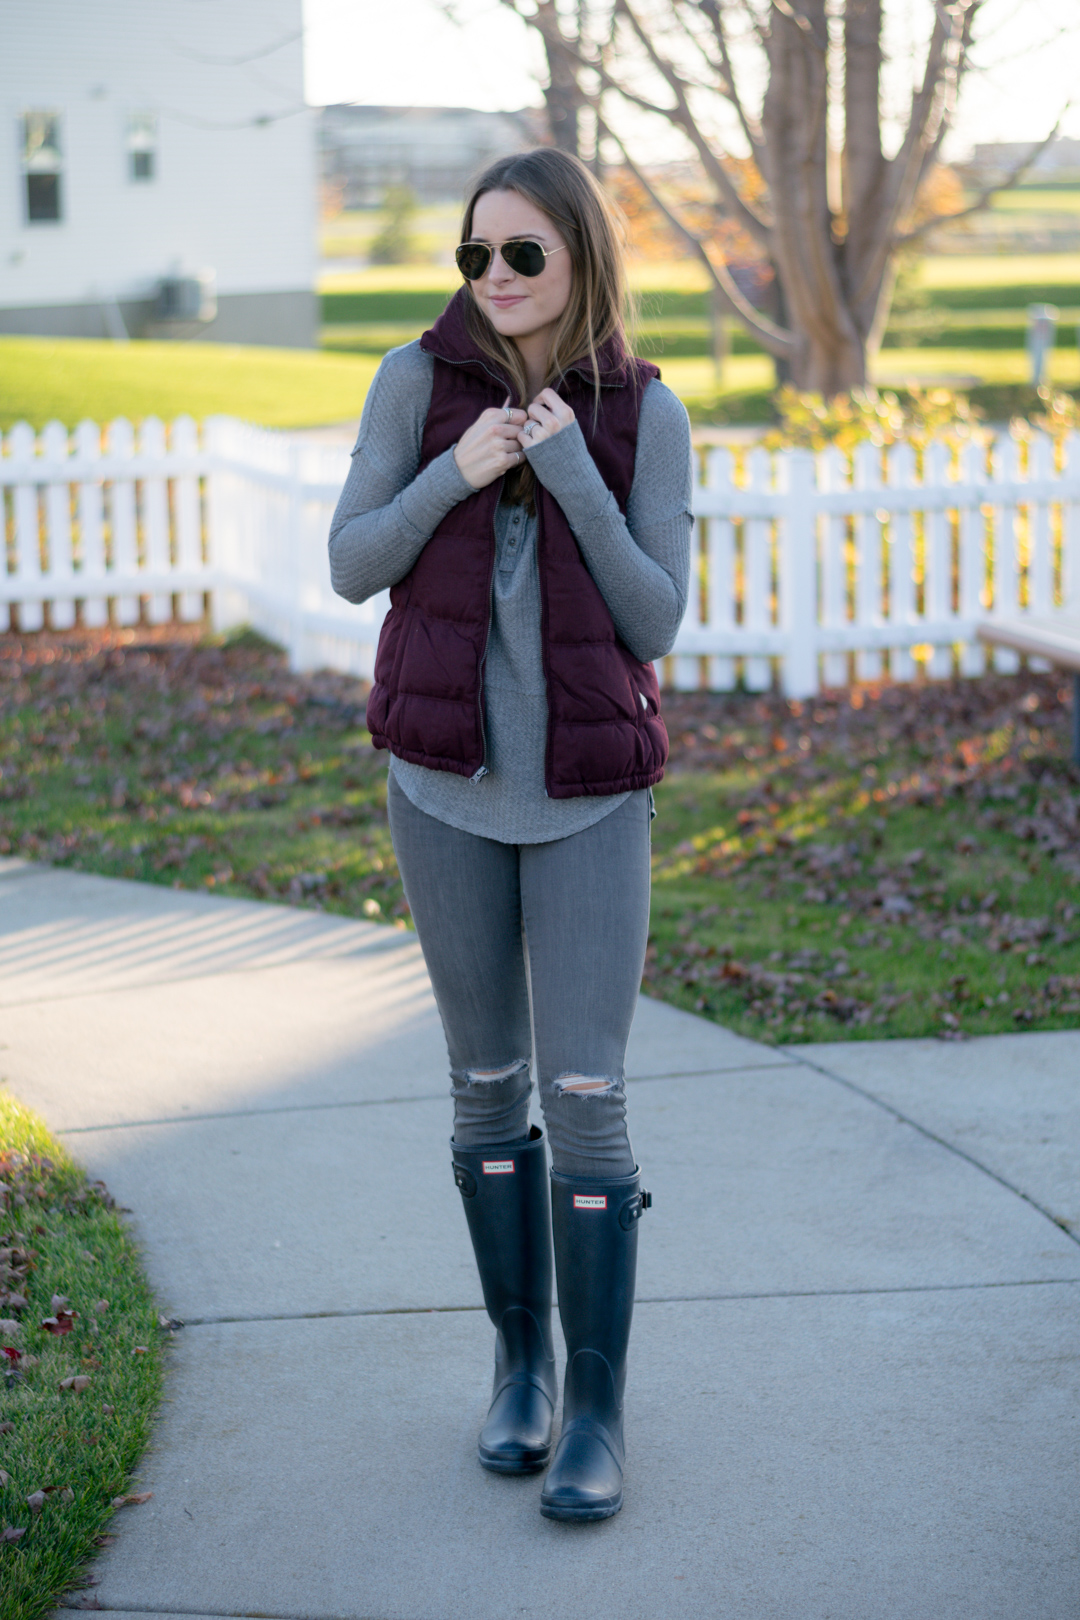 old navy textured frost free vest, wine puffer vest, maroon, burgundy, gray thermal henley top, black hunter boots outfit